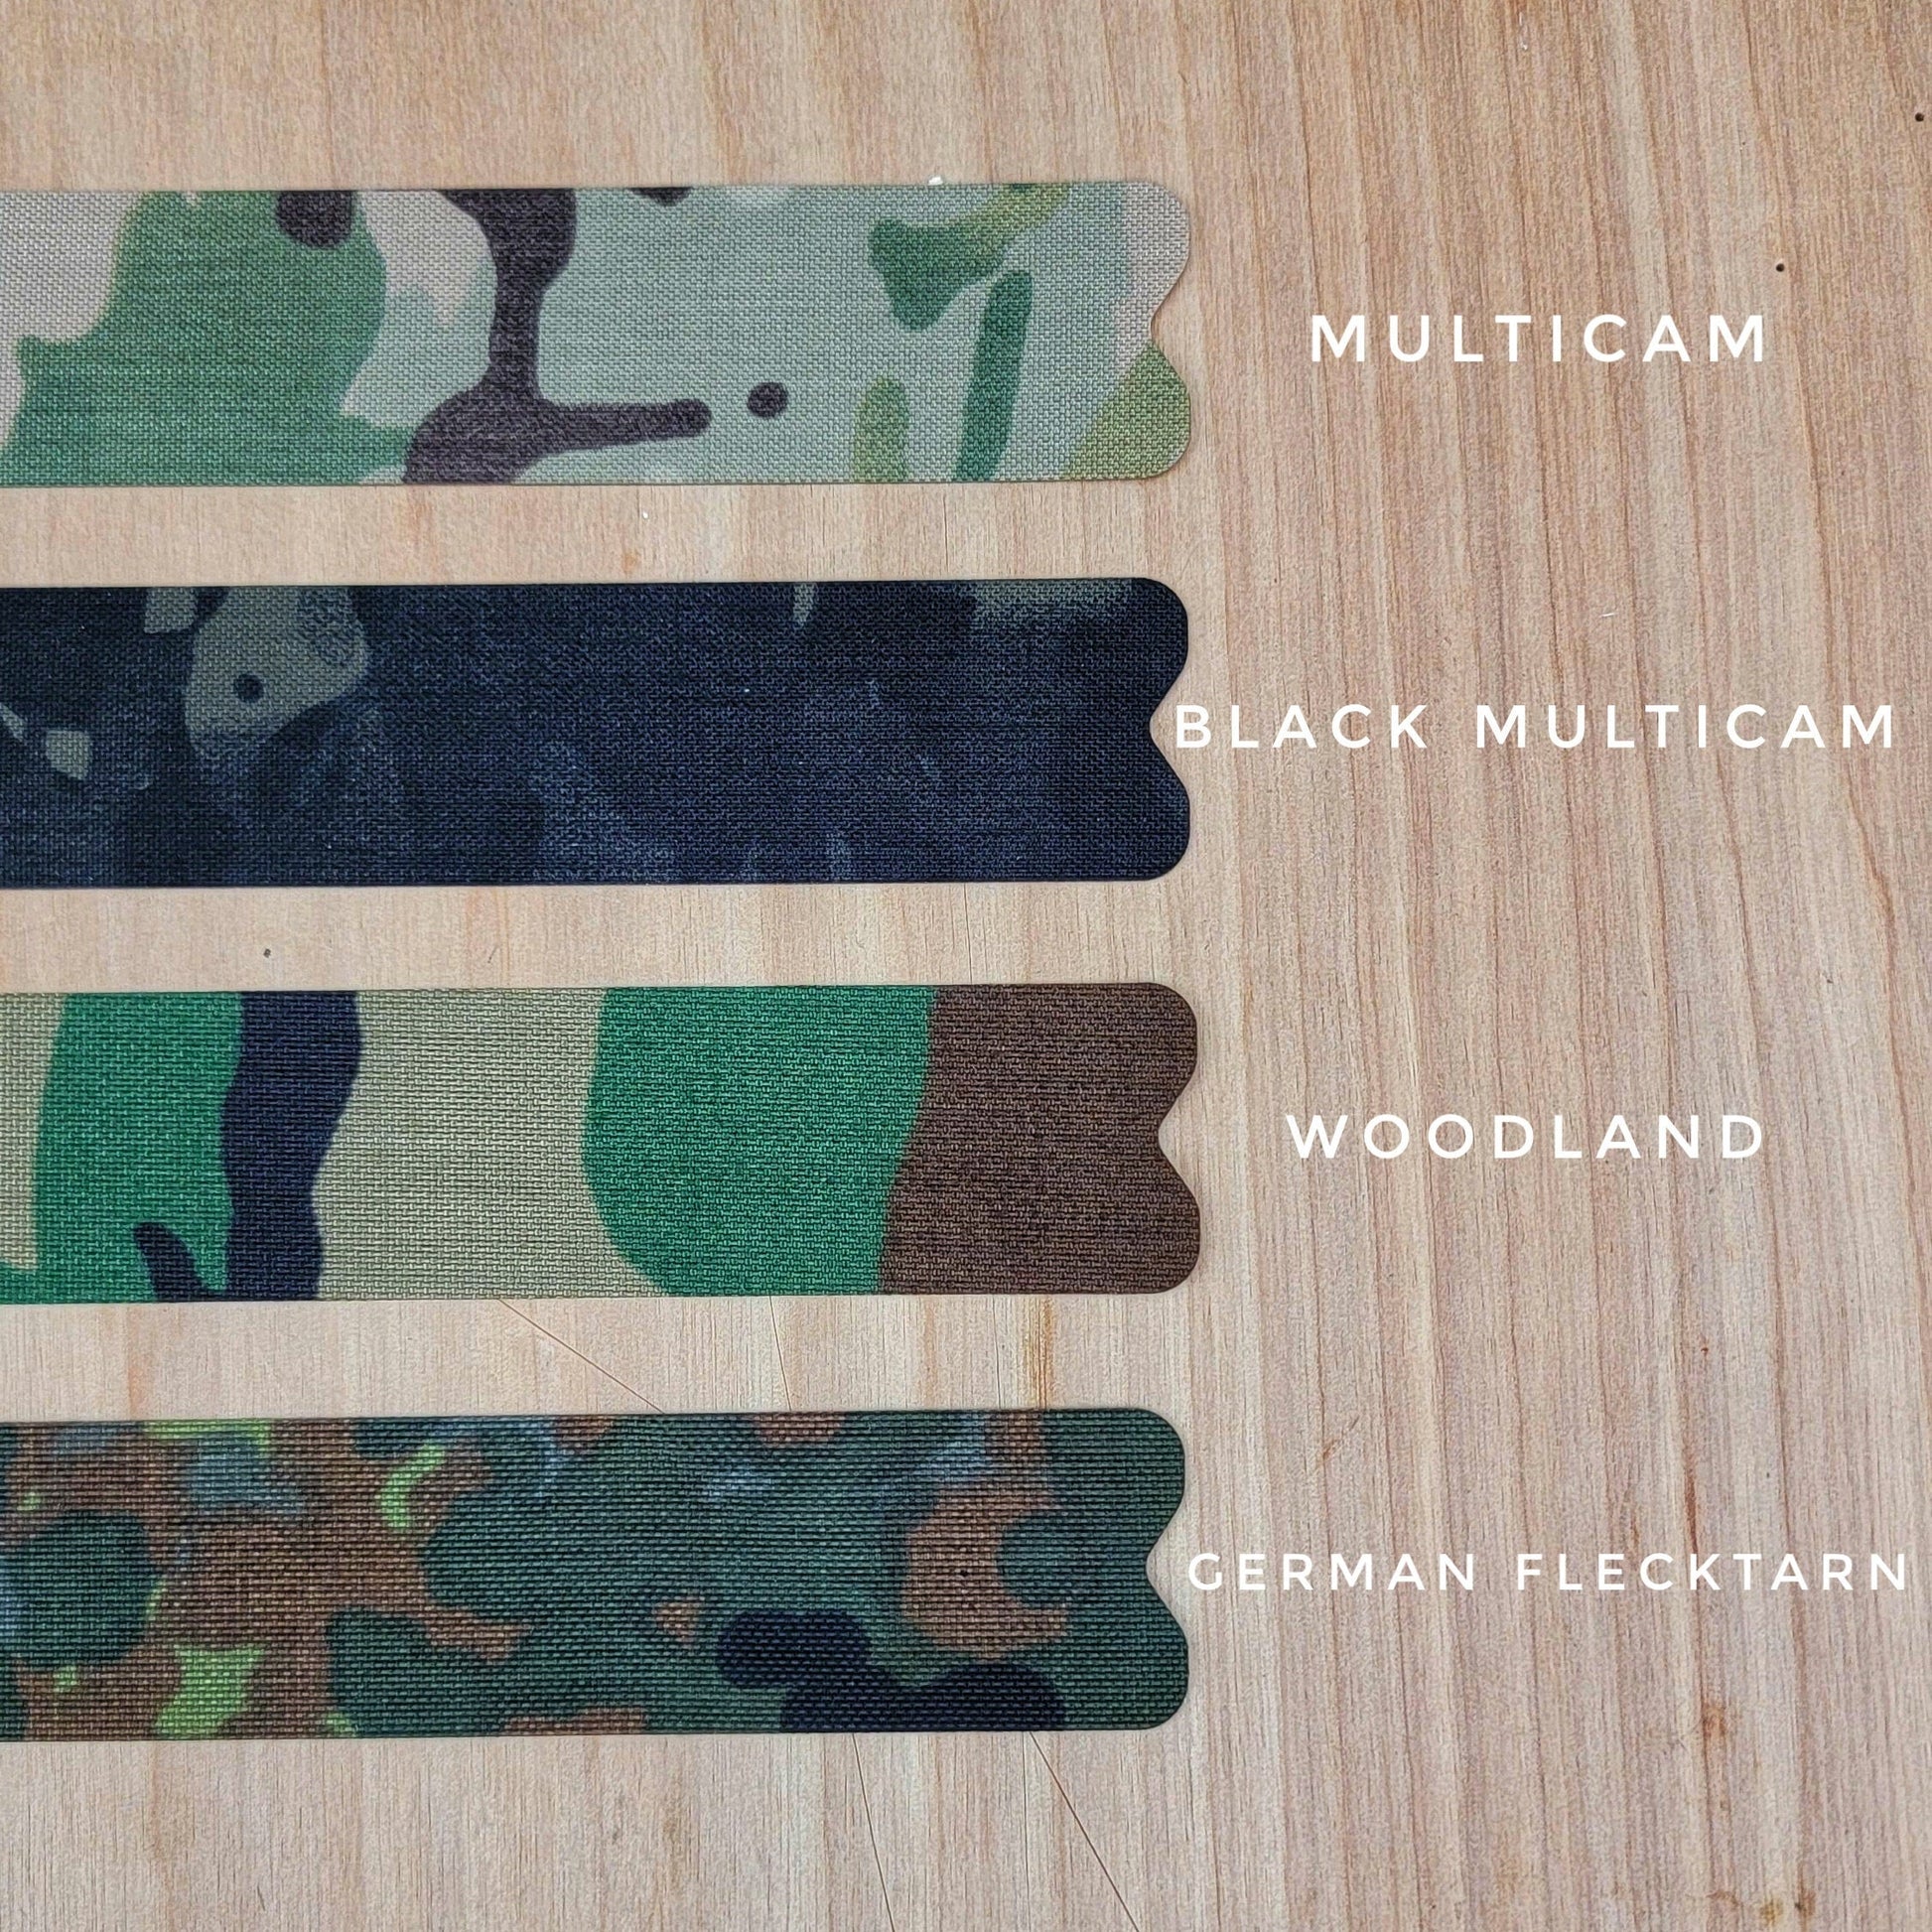 Tact-Wrap "airsoft" stickers, Cordura cheek rest for Magpul MOE stock & CTR stock,  tactical, camo, multicam, ar15, holster wrap